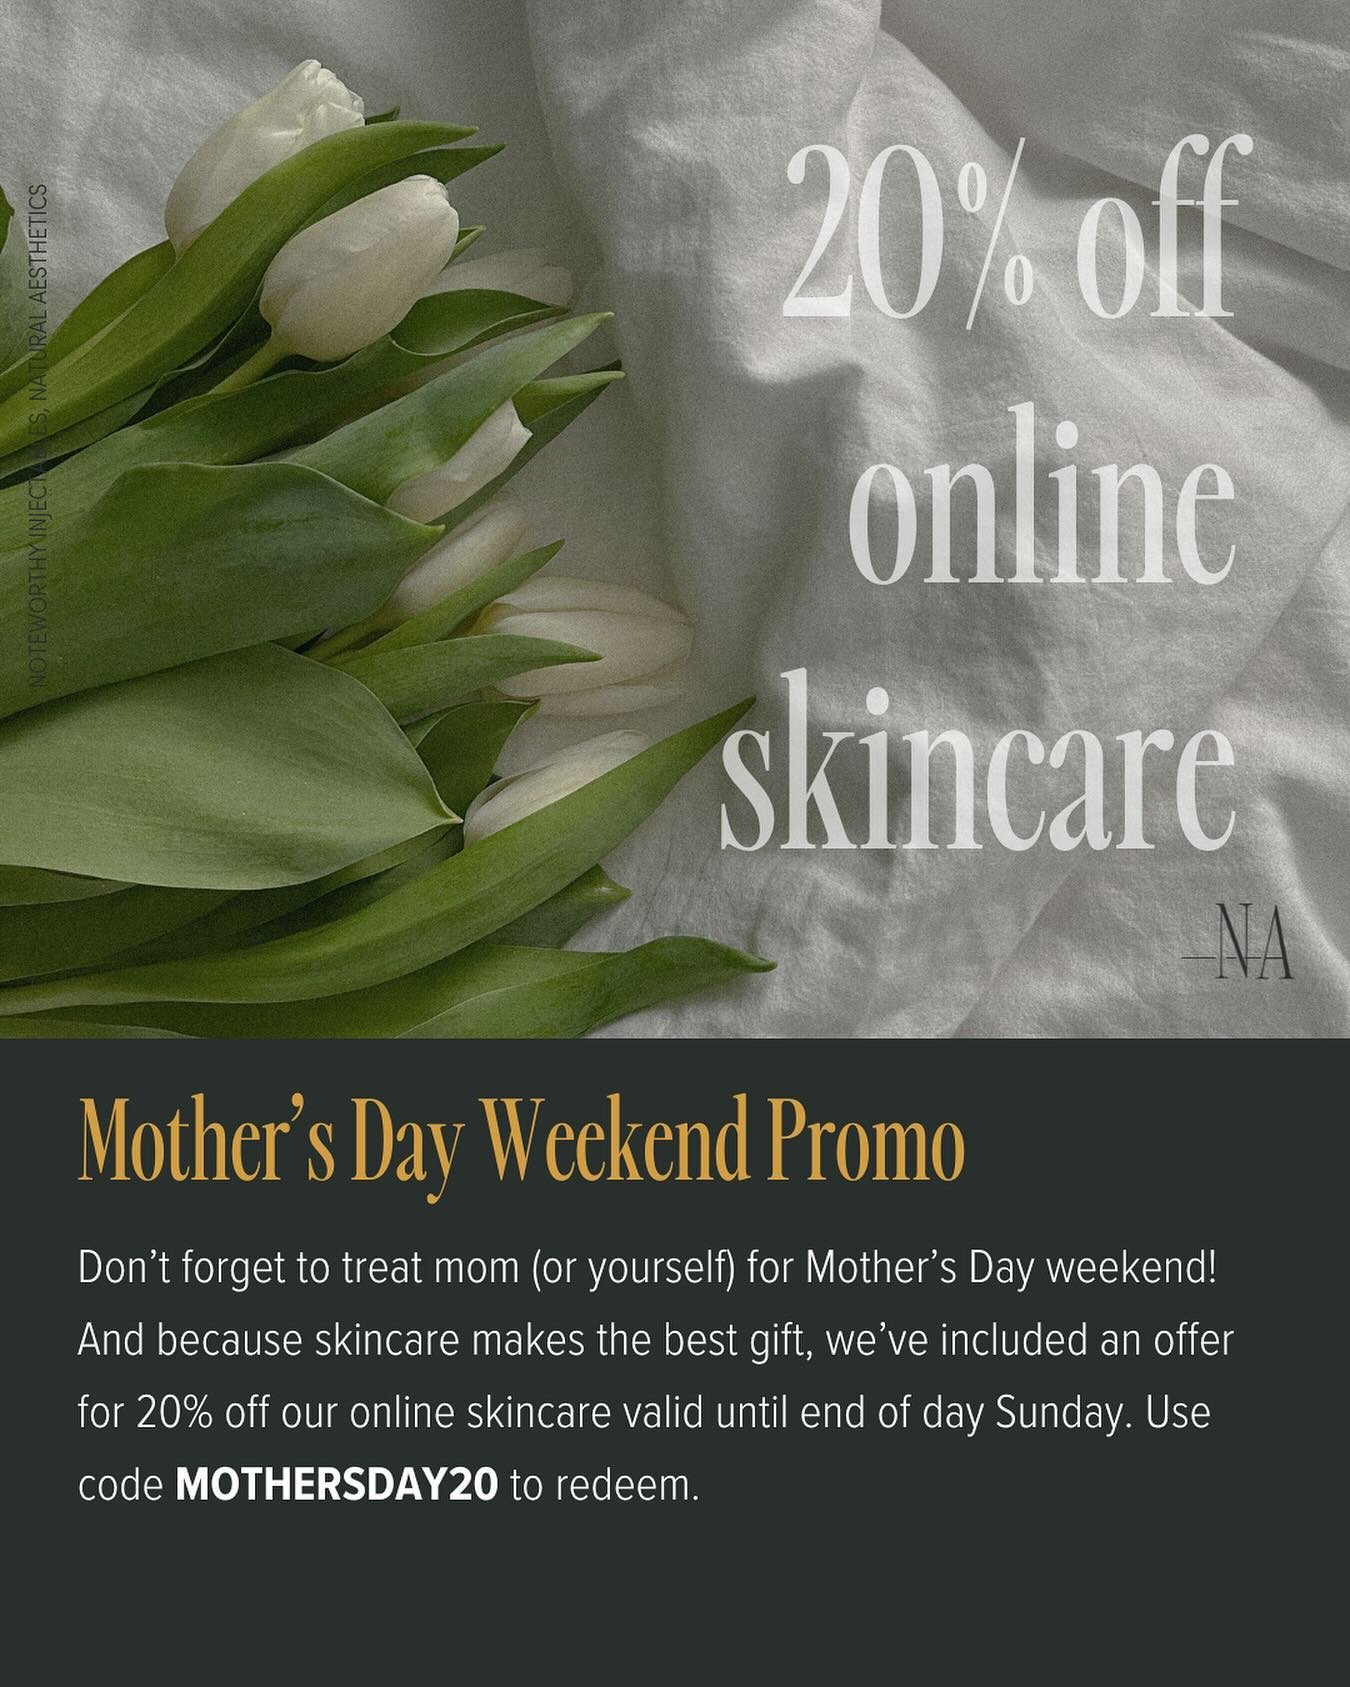 Skincare makes a great gift for mom 🌸

Use code MOTHERSDAY20 to get 20% off our online skincare all weekend. Don&rsquo;t forget to stock up on SPF - we&rsquo;ve got lots of colorescience options☀️ 

#ninaaesthetics #yycmedspa #yycliving #yyclife #sk